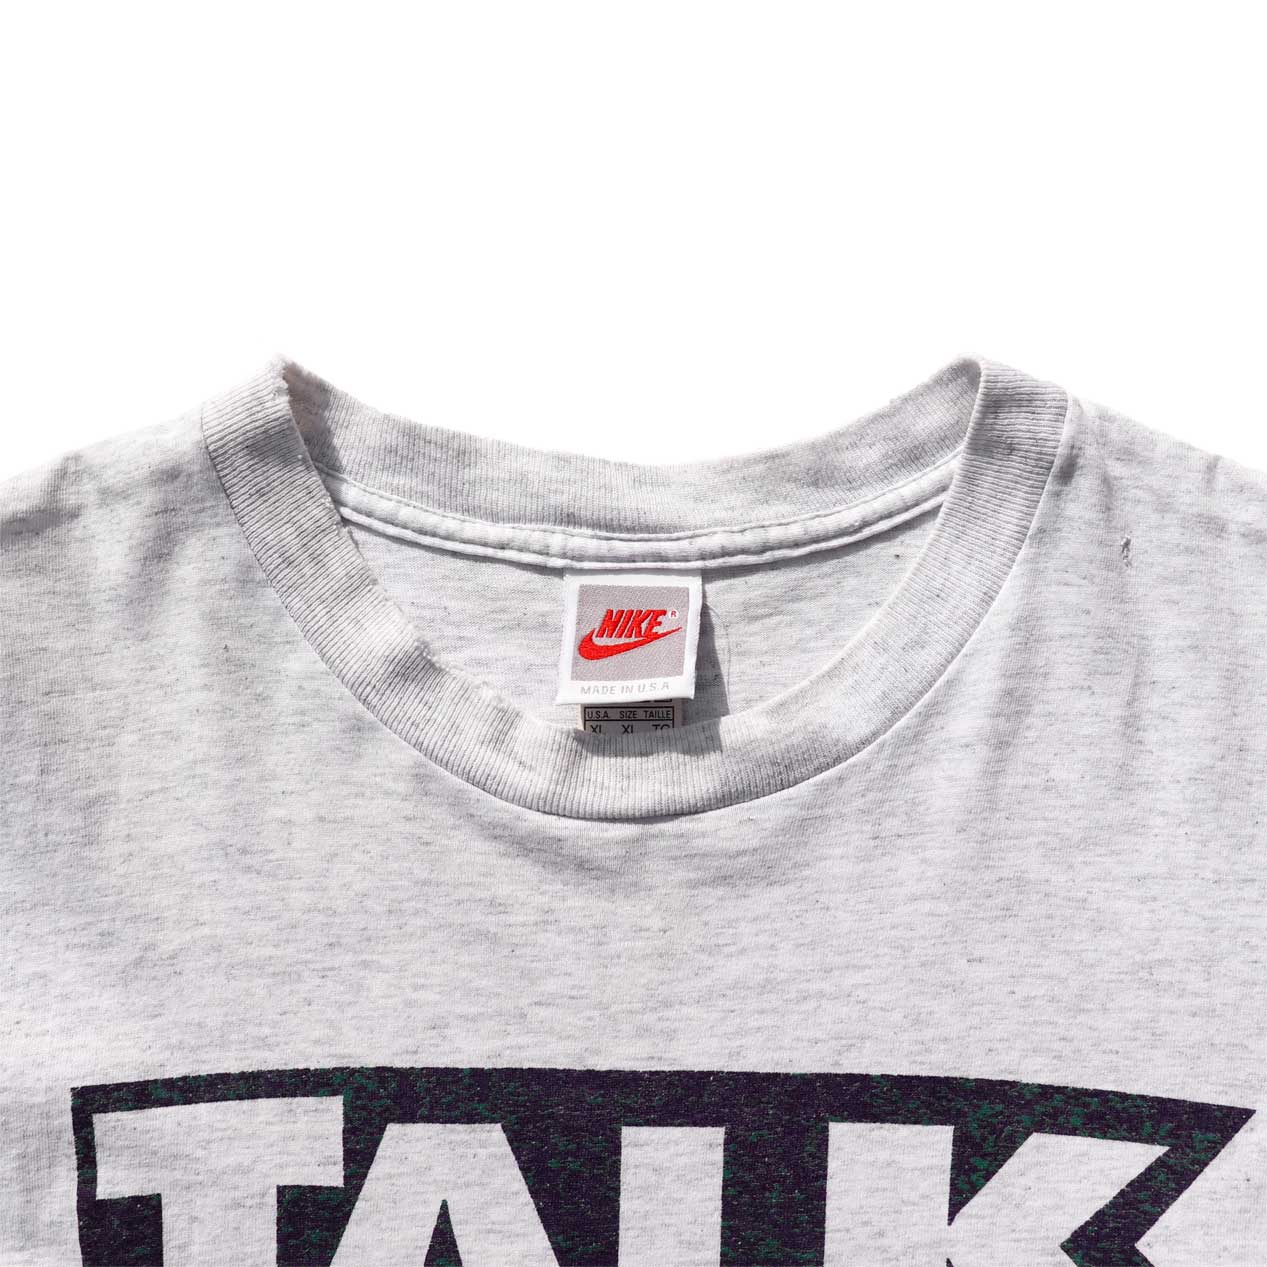 POST JUNK / 90's NIKE “TALK DIRTY TO ME” USA製 Tシャツ [XL]